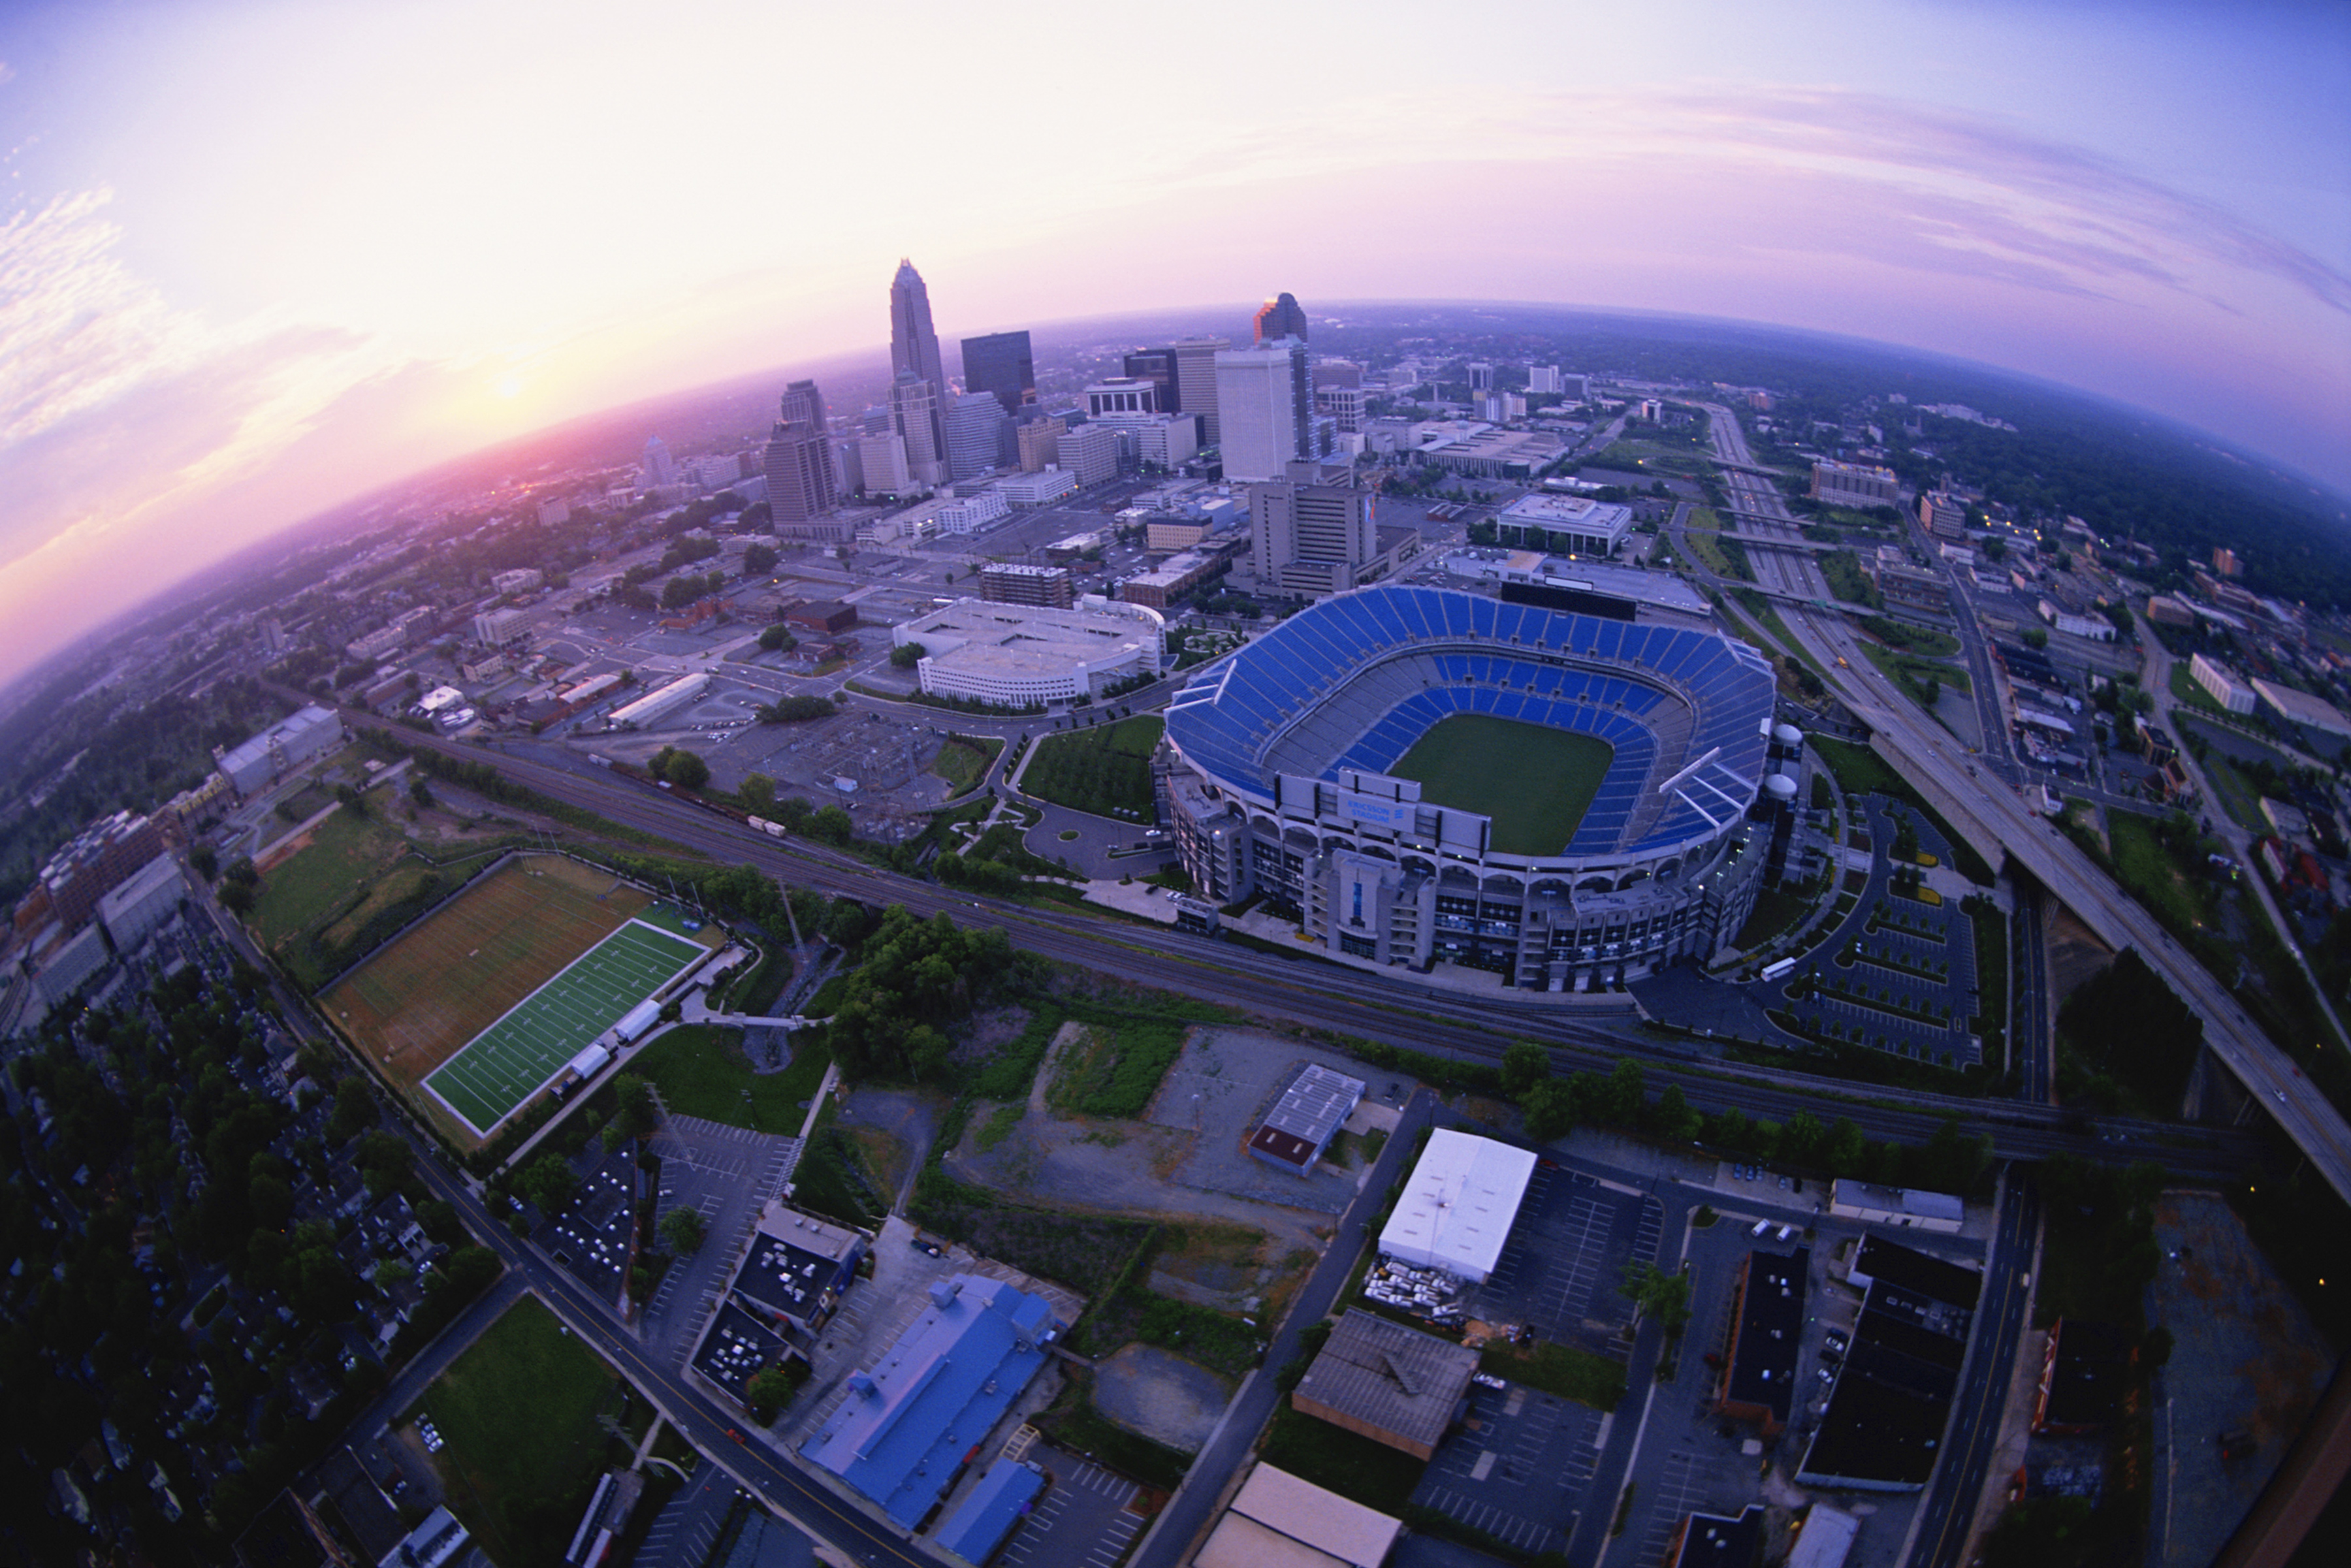 Arial view of Bank of America stadium during sunset, showing the stadium and surrounding city at Bank of America Stadium